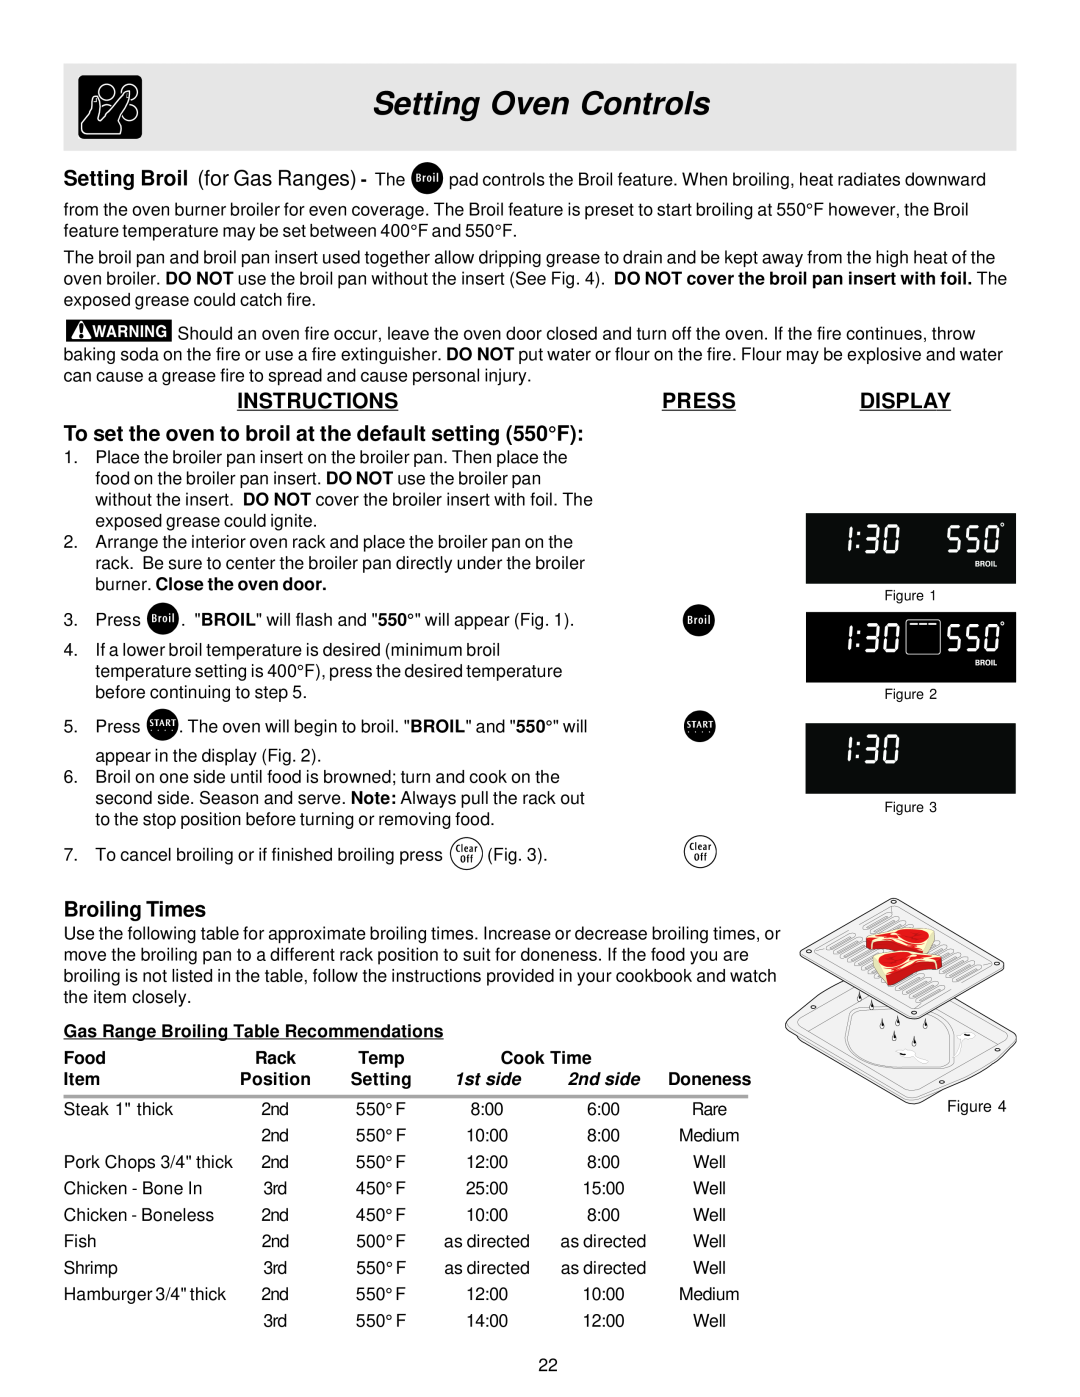 Frigidaire ES400 To set the oven to broil at the default setting 550F, Broiling Times, Setting Oven Controls, Instructions 